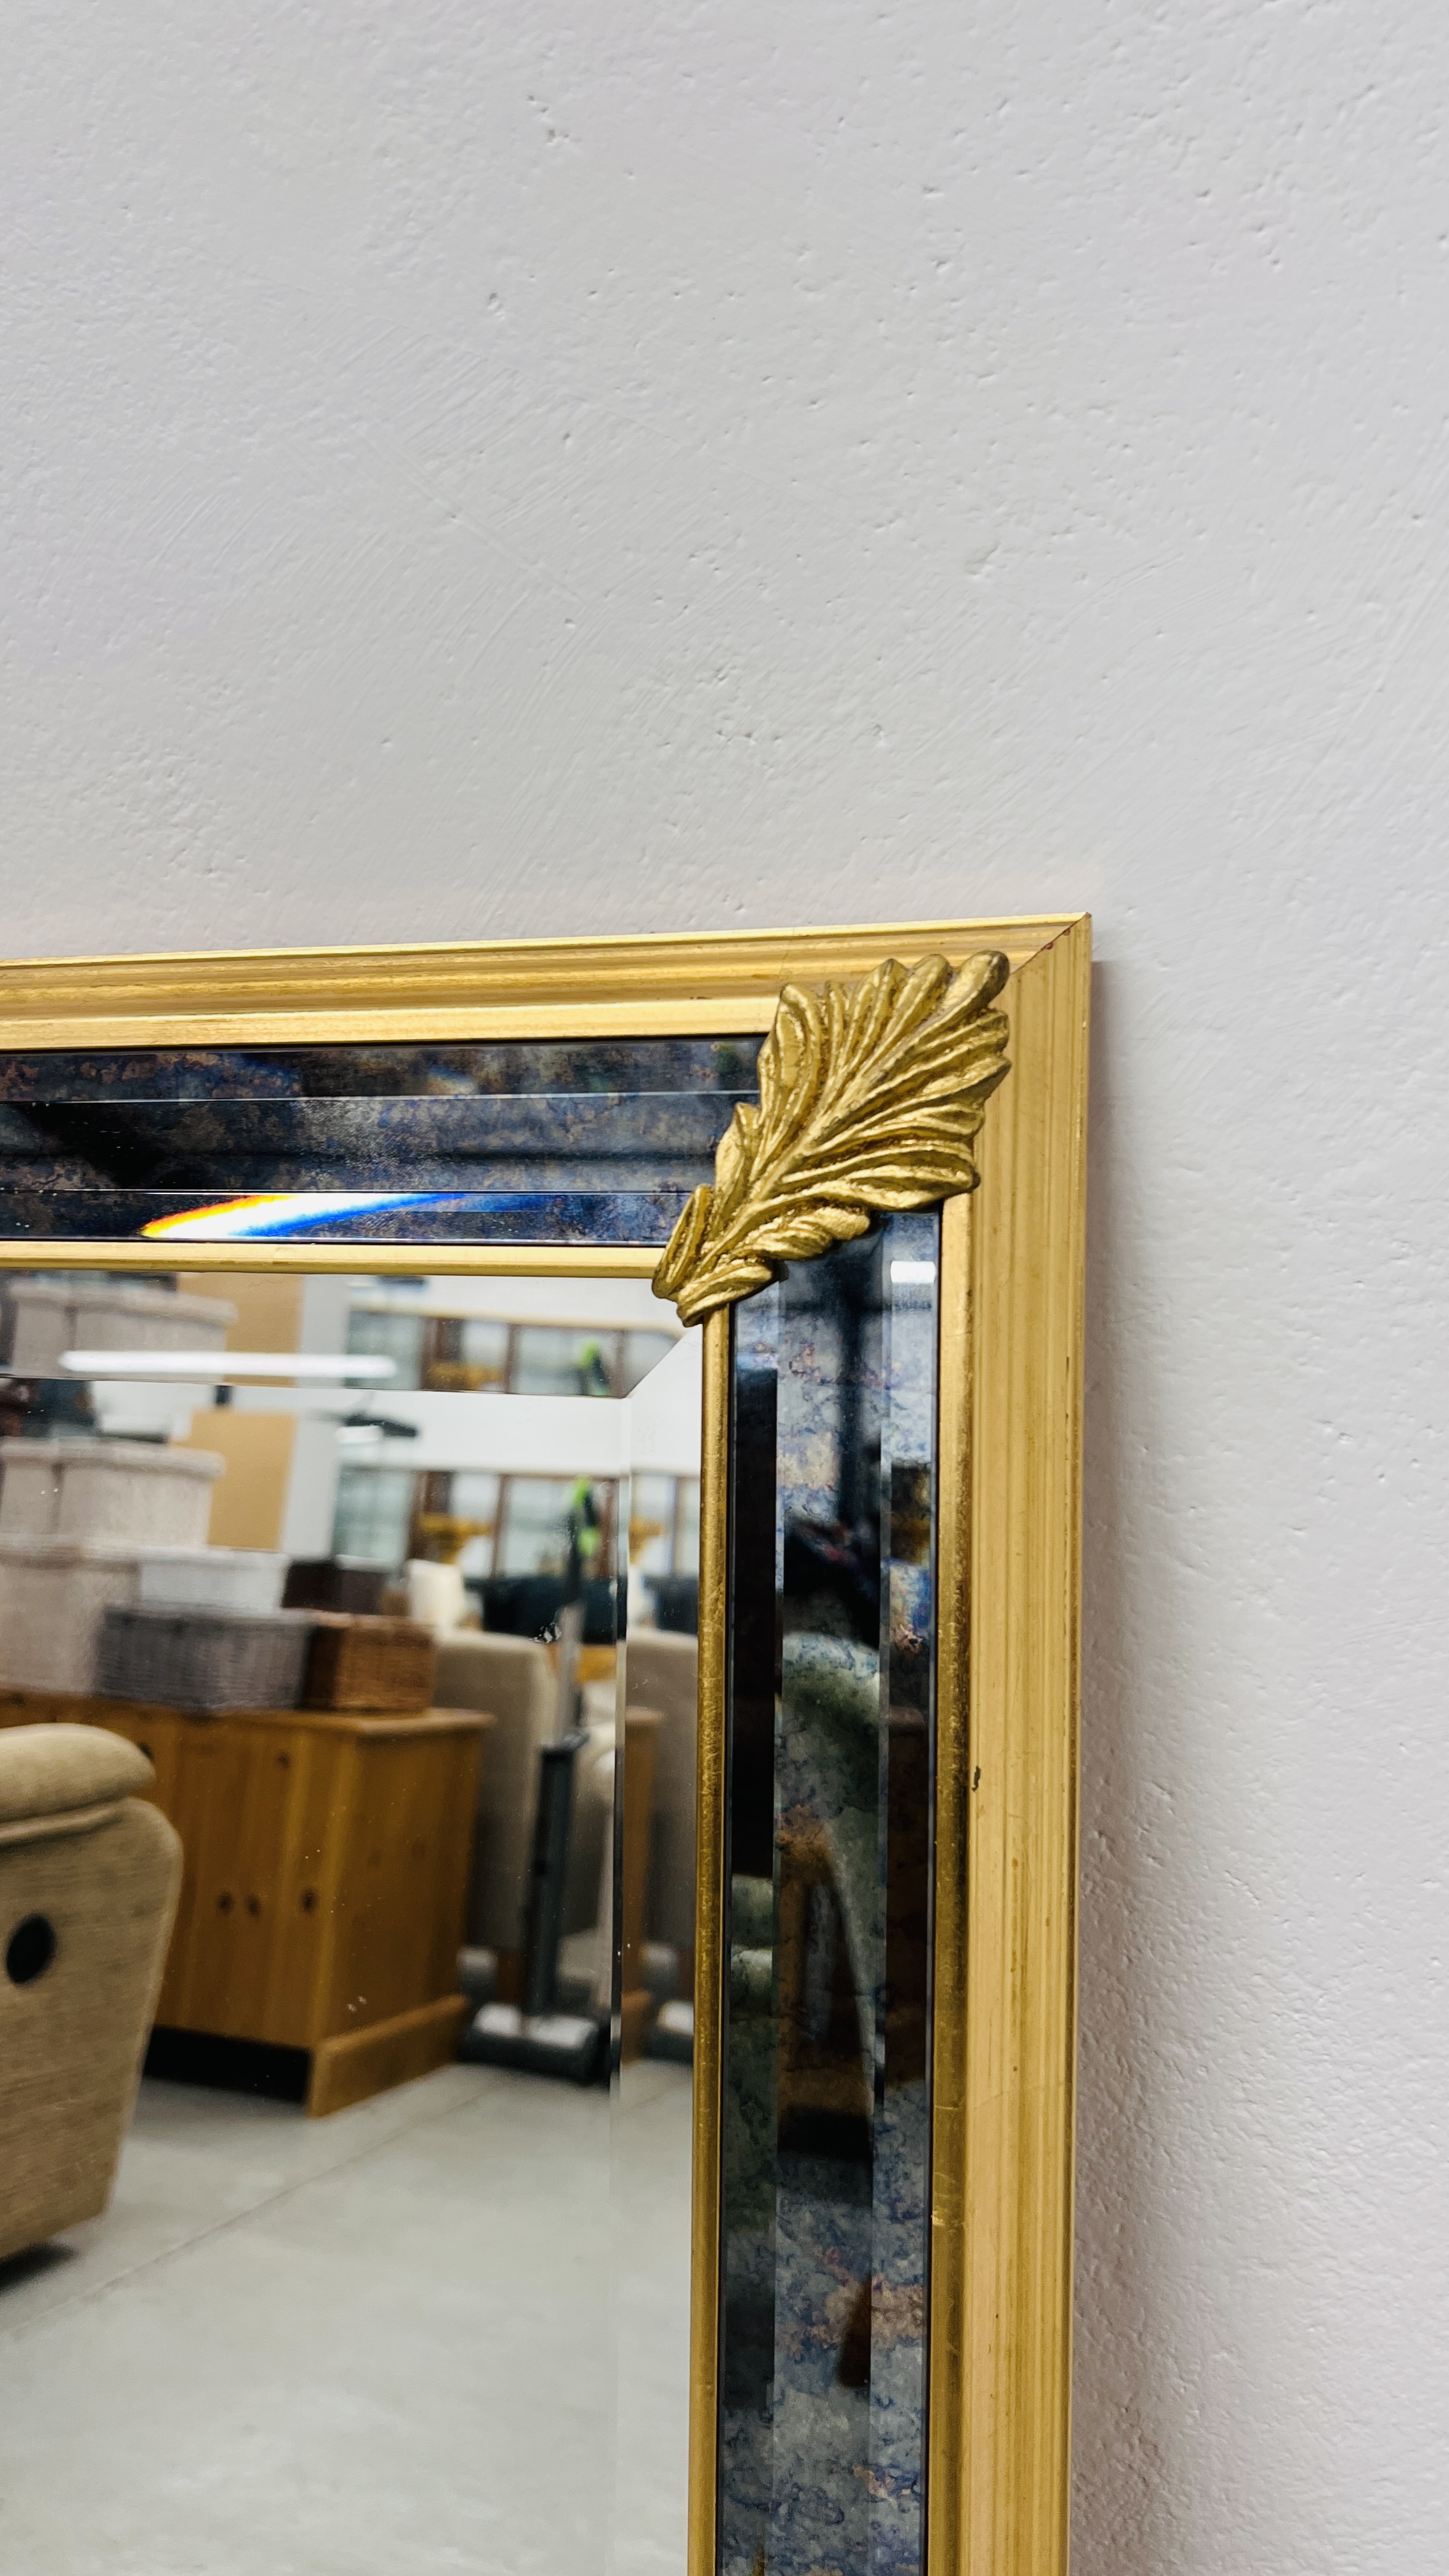 LARGE DESIGNER GILT FRAMED WALL MIRROR WITH BEVELLED GLASS WIDTH 104CM. HEIGHT 127CM. - Image 2 of 6